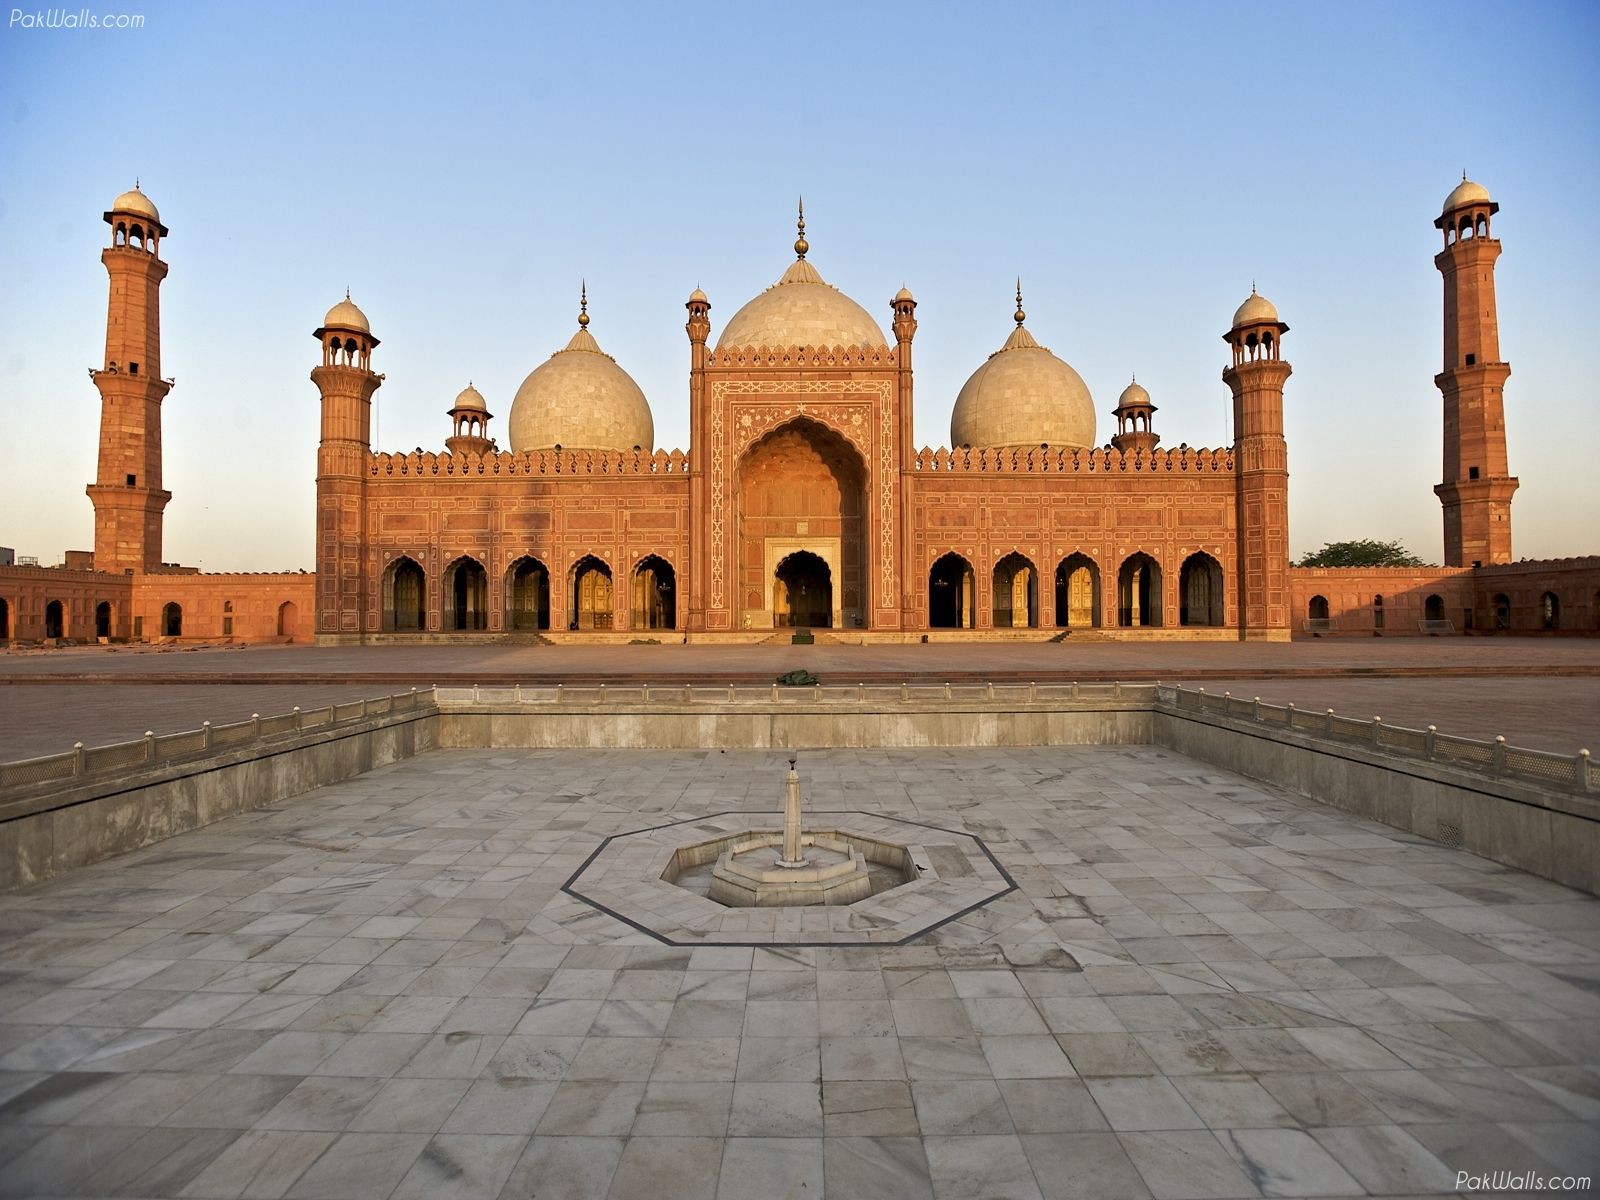 You'll want to book your tickets now!. Cool places to visit, Beautiful mosques, Historical place